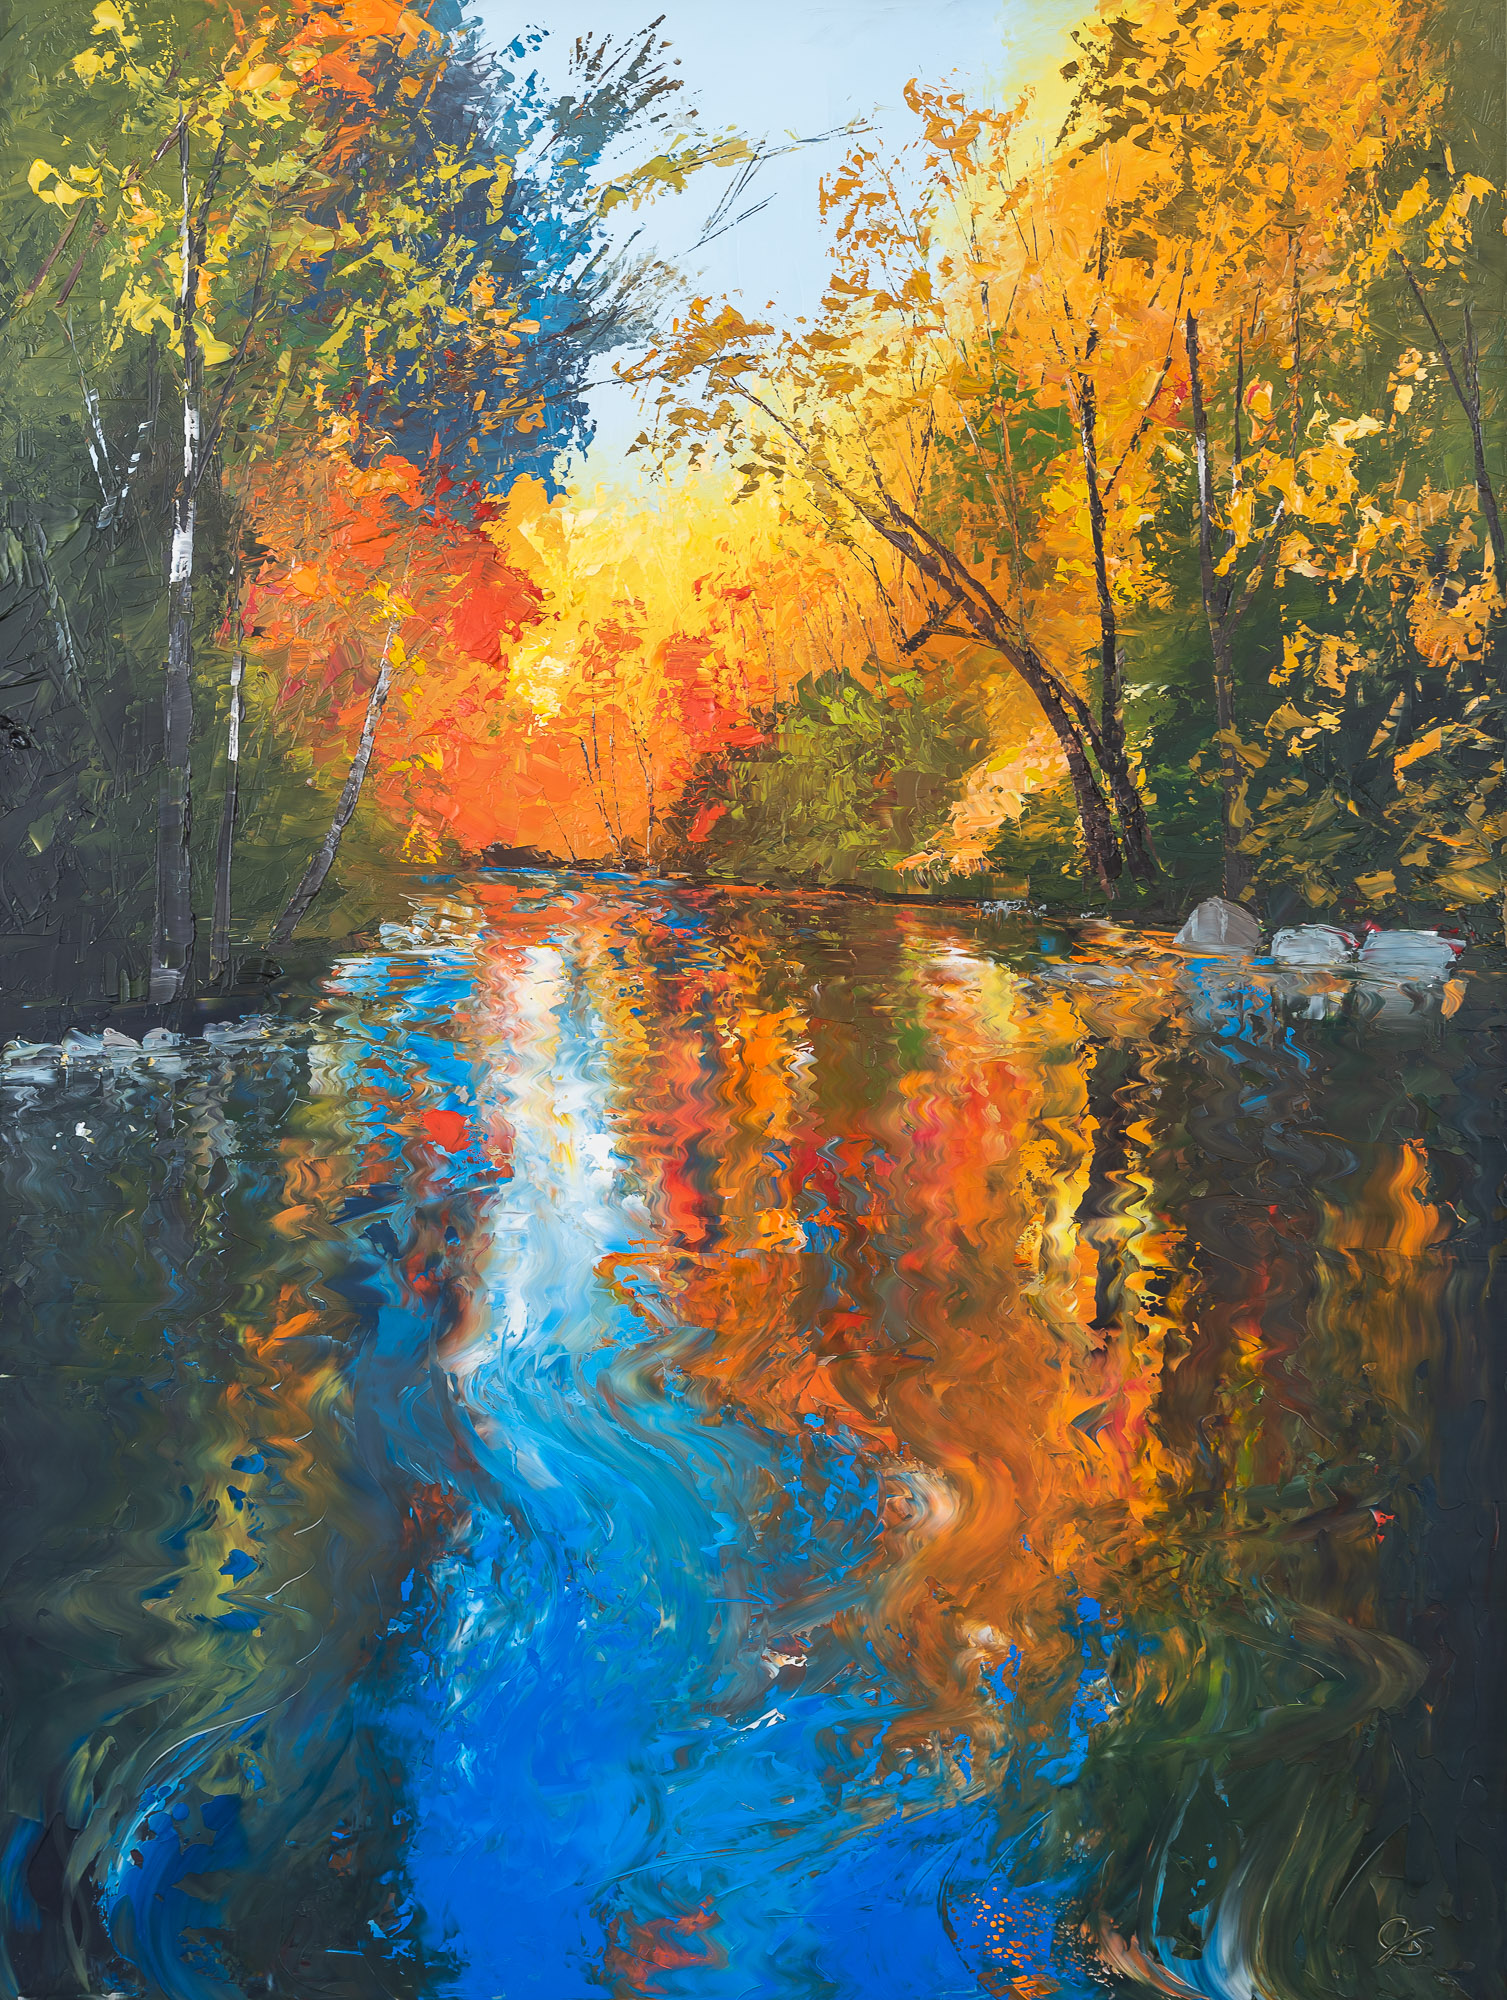 Autumn Awakens - Original Landscape Painting by UK Contemporary Artist Paul Kenton, from the Landscapes Collection